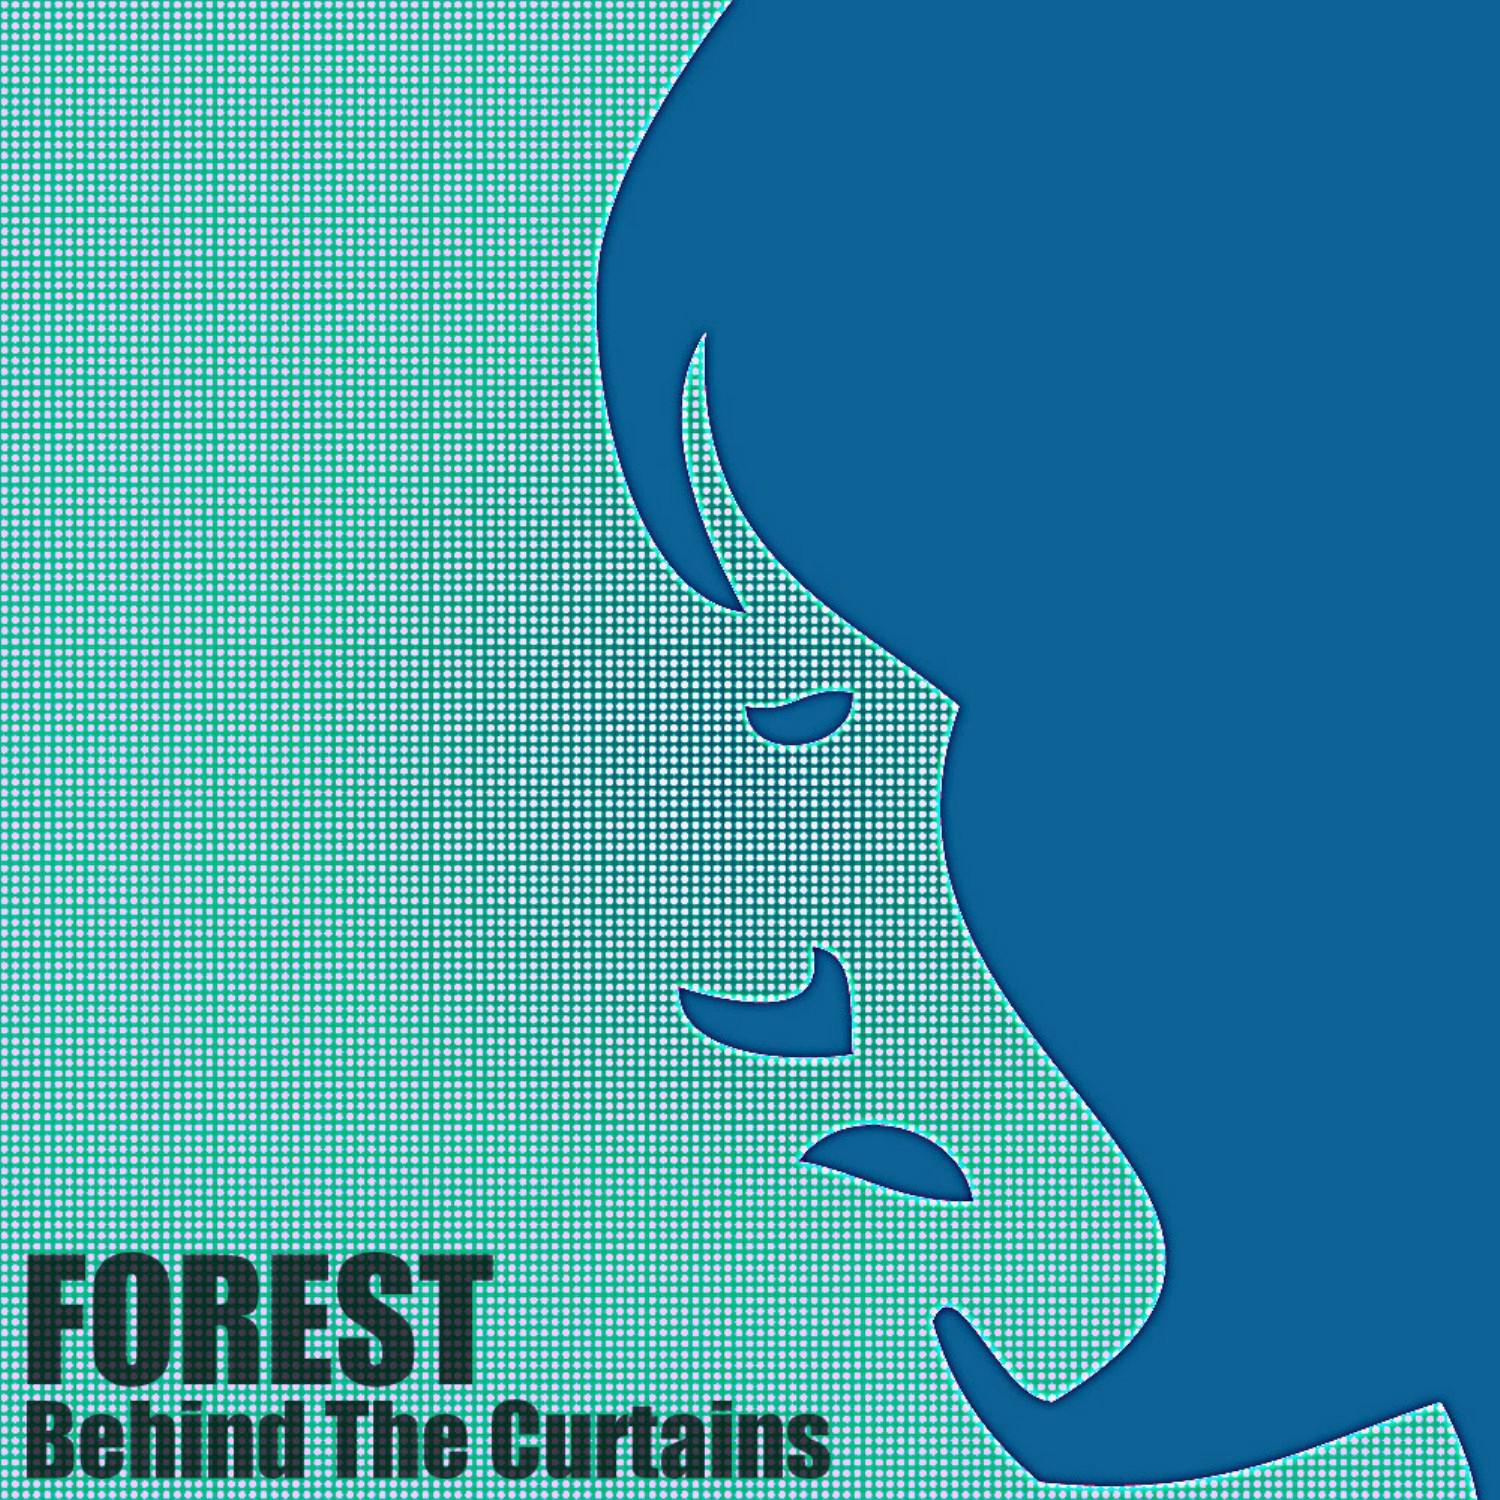 Forest - Behind the Curtains (Original Mix)